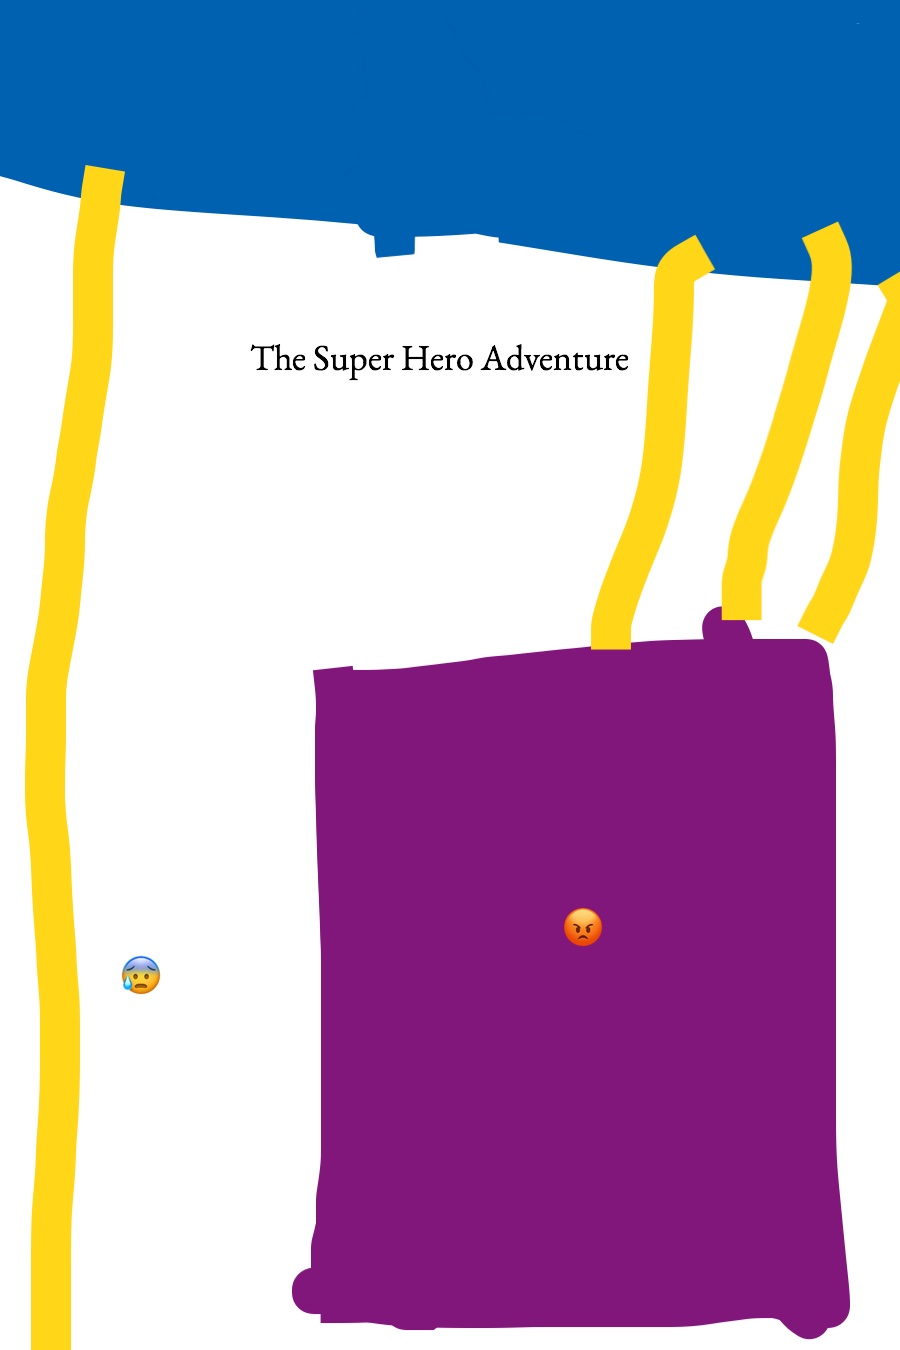 The Superhero Adventure by Claire H